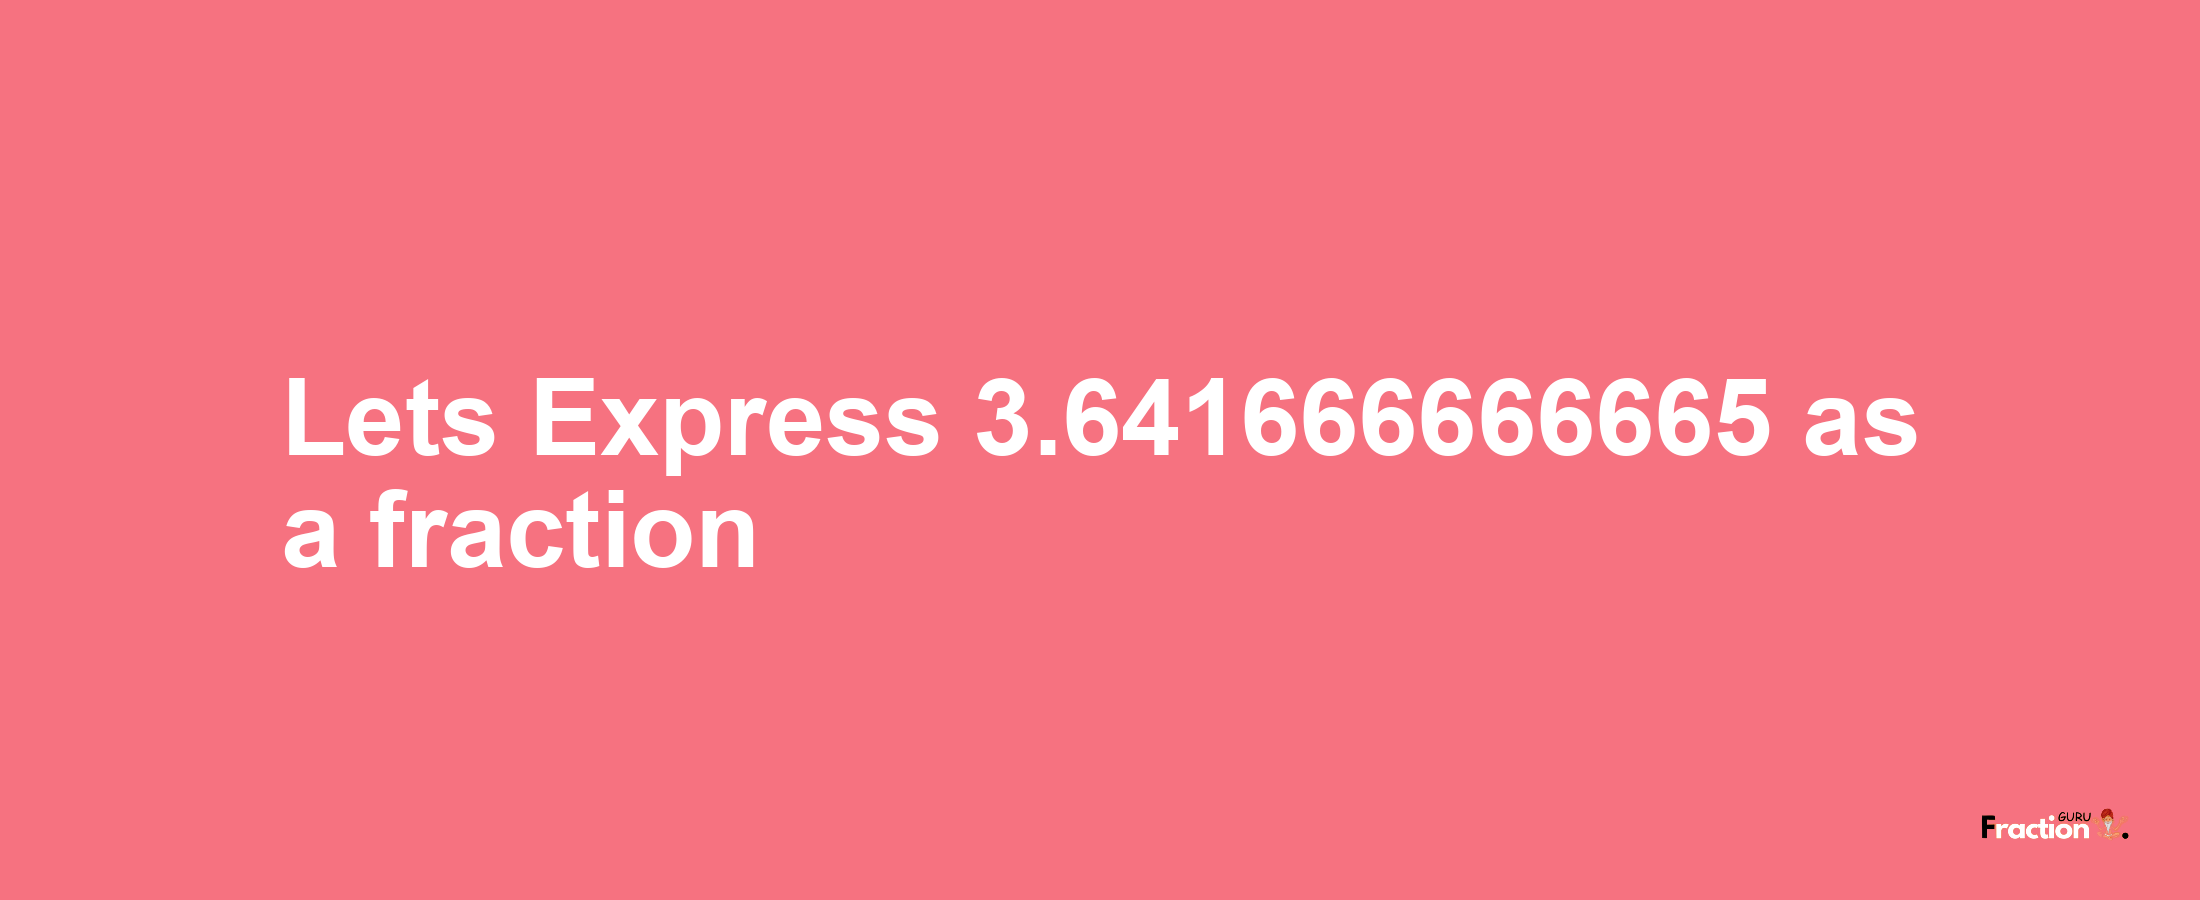 Lets Express 3.641666666665 as afraction